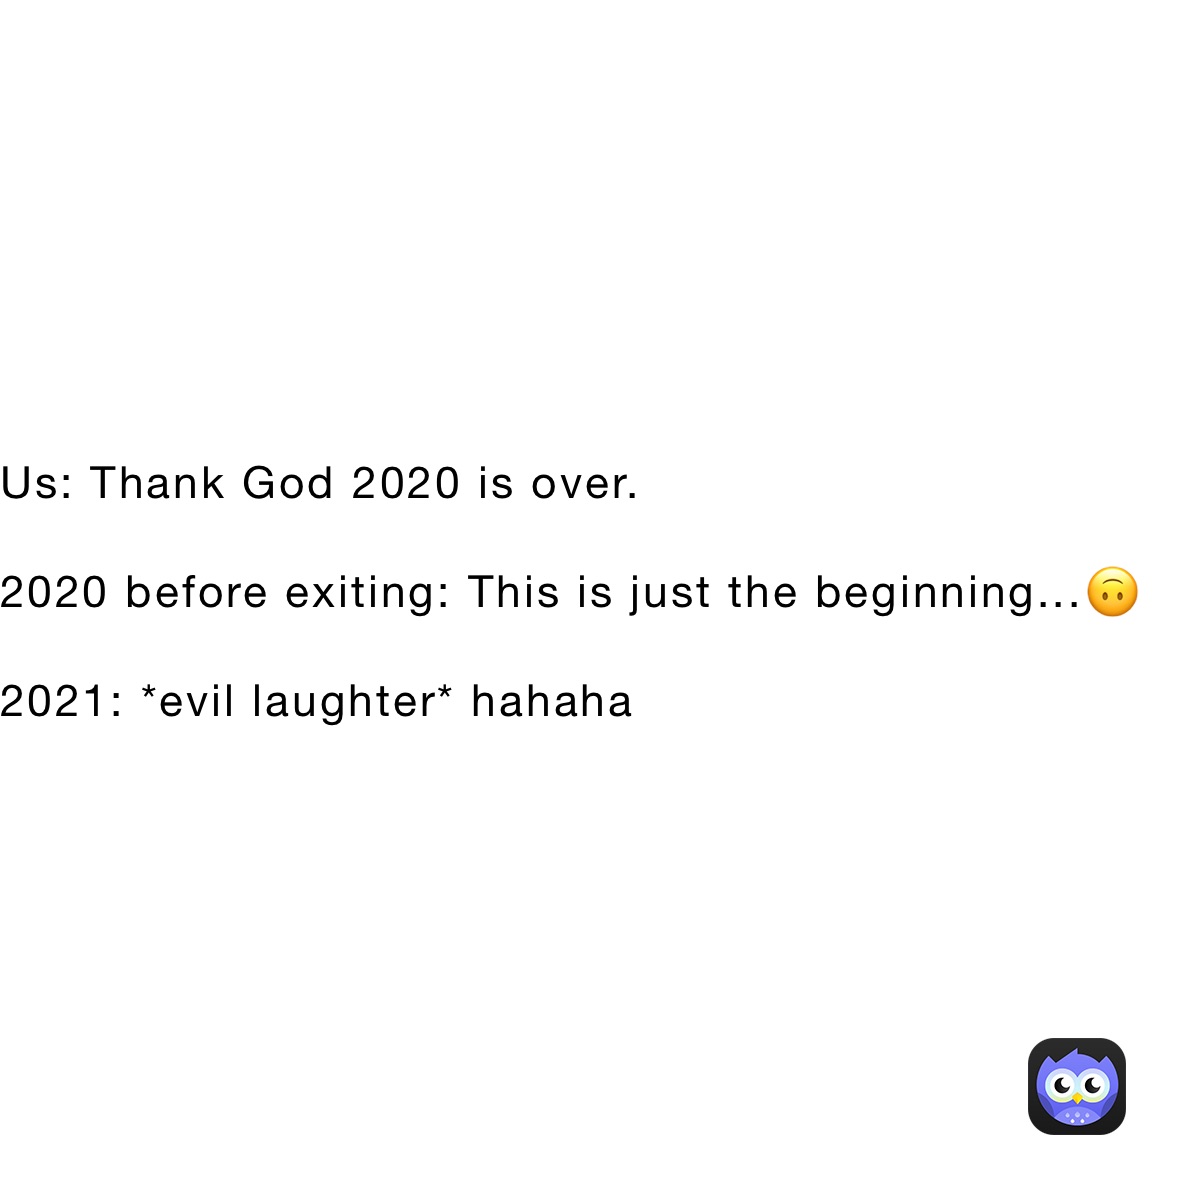 Us: Thank God 2020 is over.

2020 before exiting: This is just the beginning...🙃

2021: *evil laughter* hahaha